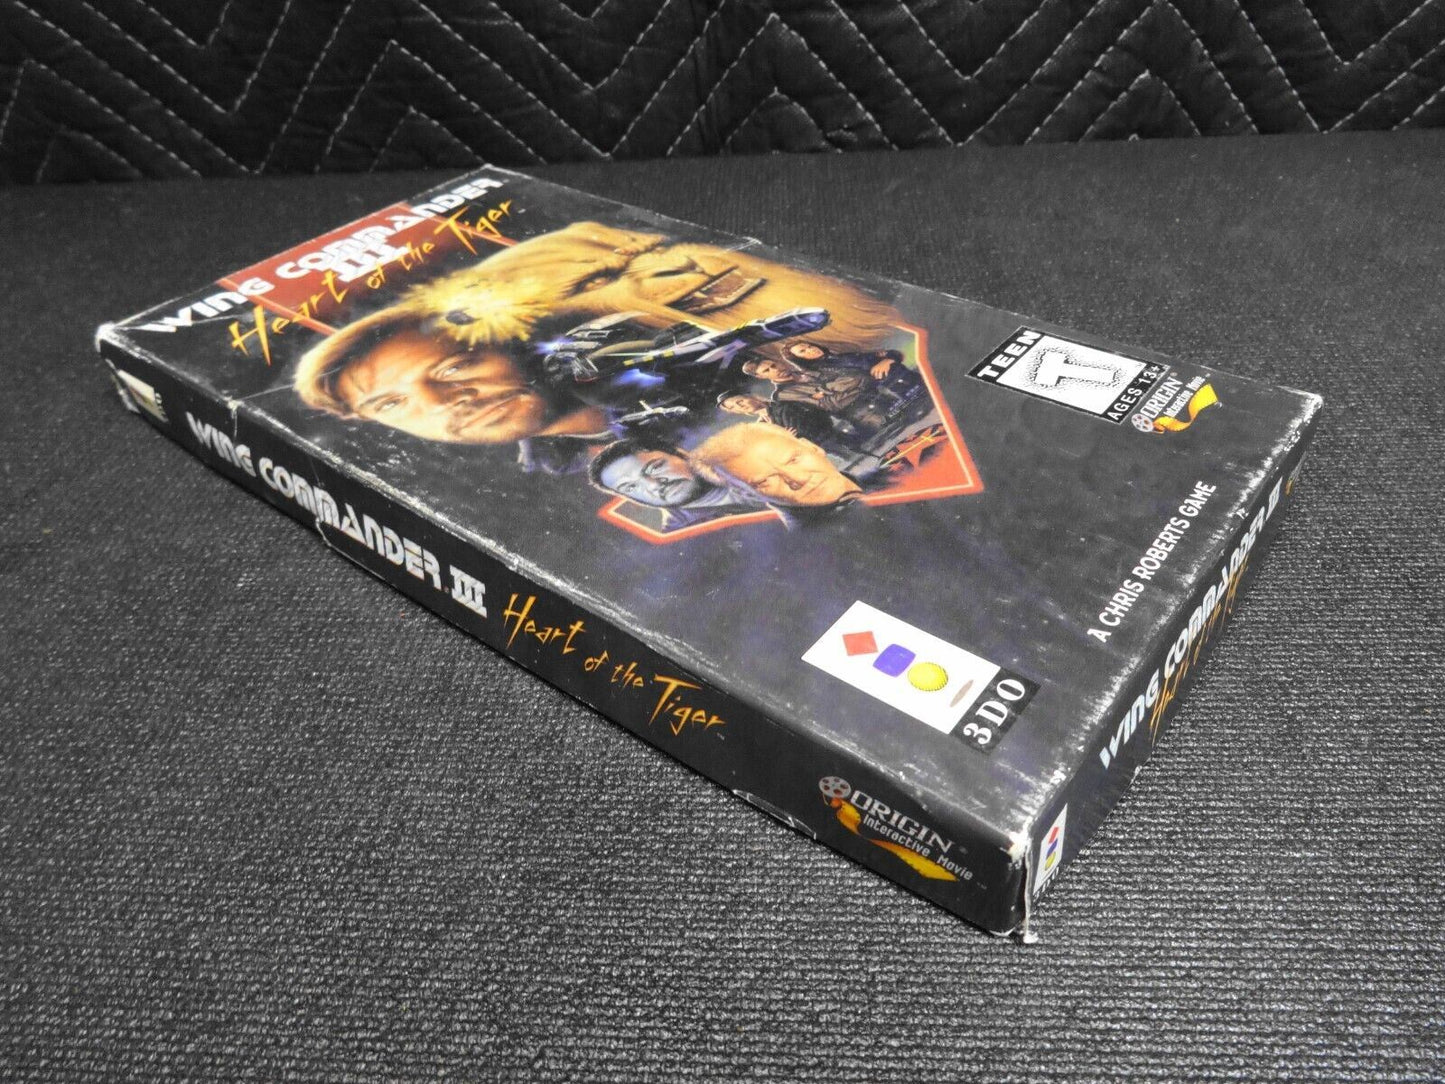 Wing Commander III: Heart of the Tiger (Panasonic 3DO) Complete Long Box